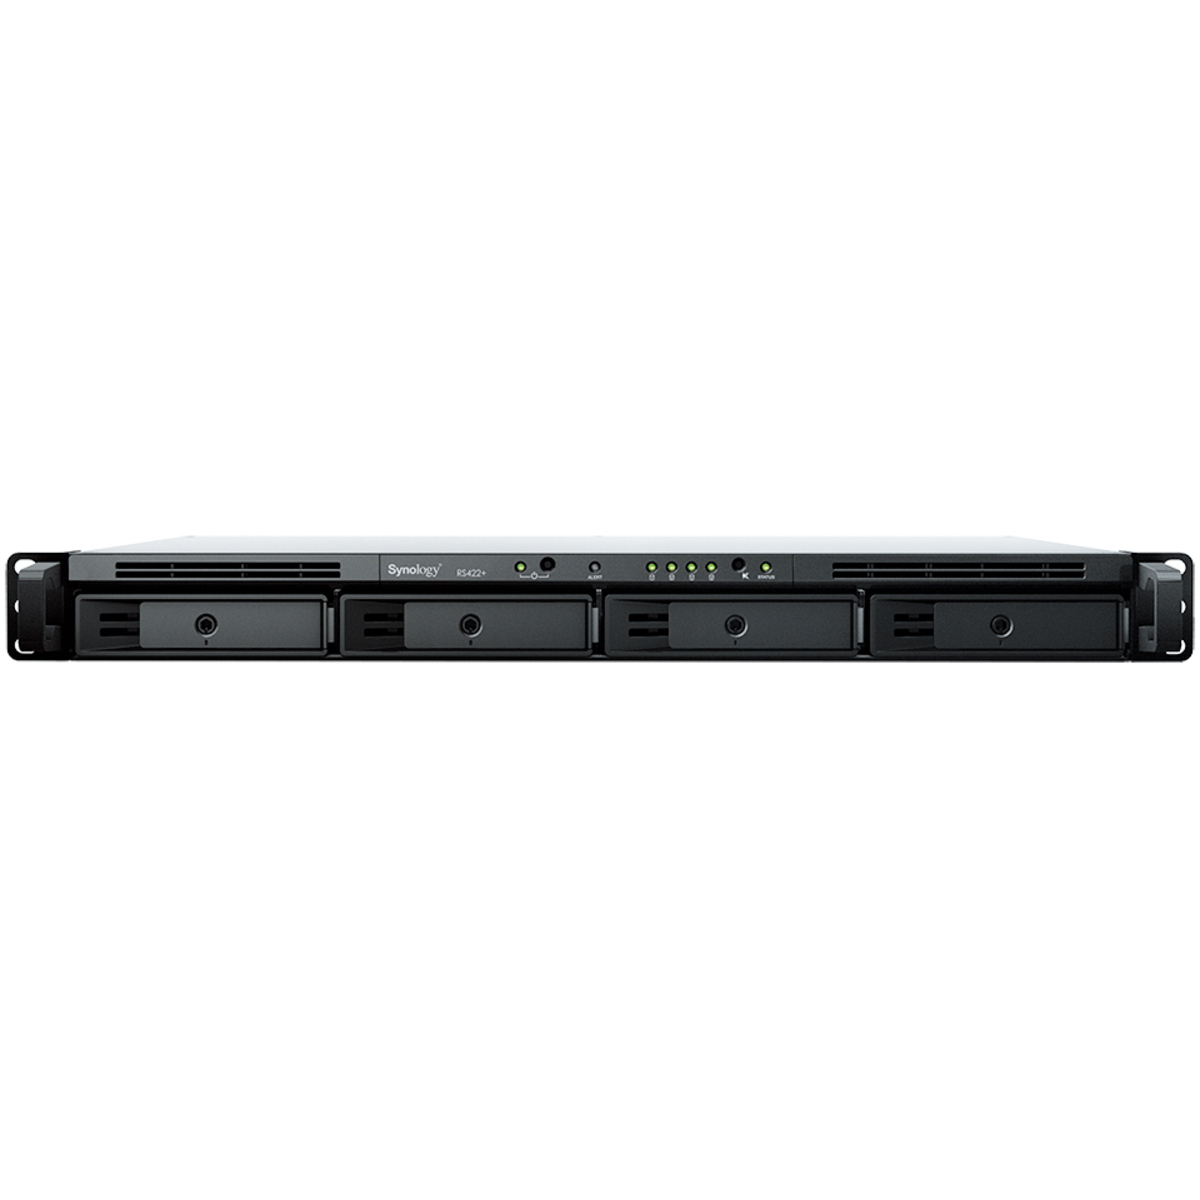 Synology RackStation RS422+ 96tb 4-Bay RackMount Personal / Basic Home / Small Office NAS - Network Attached Storage Device 4x24tb Seagate IronWolf Pro ST24000NT002 3.5 7200rpm SATA 6Gb/s HDD NAS Class Drives Installed - Burn-In Tested RackStation RS422+